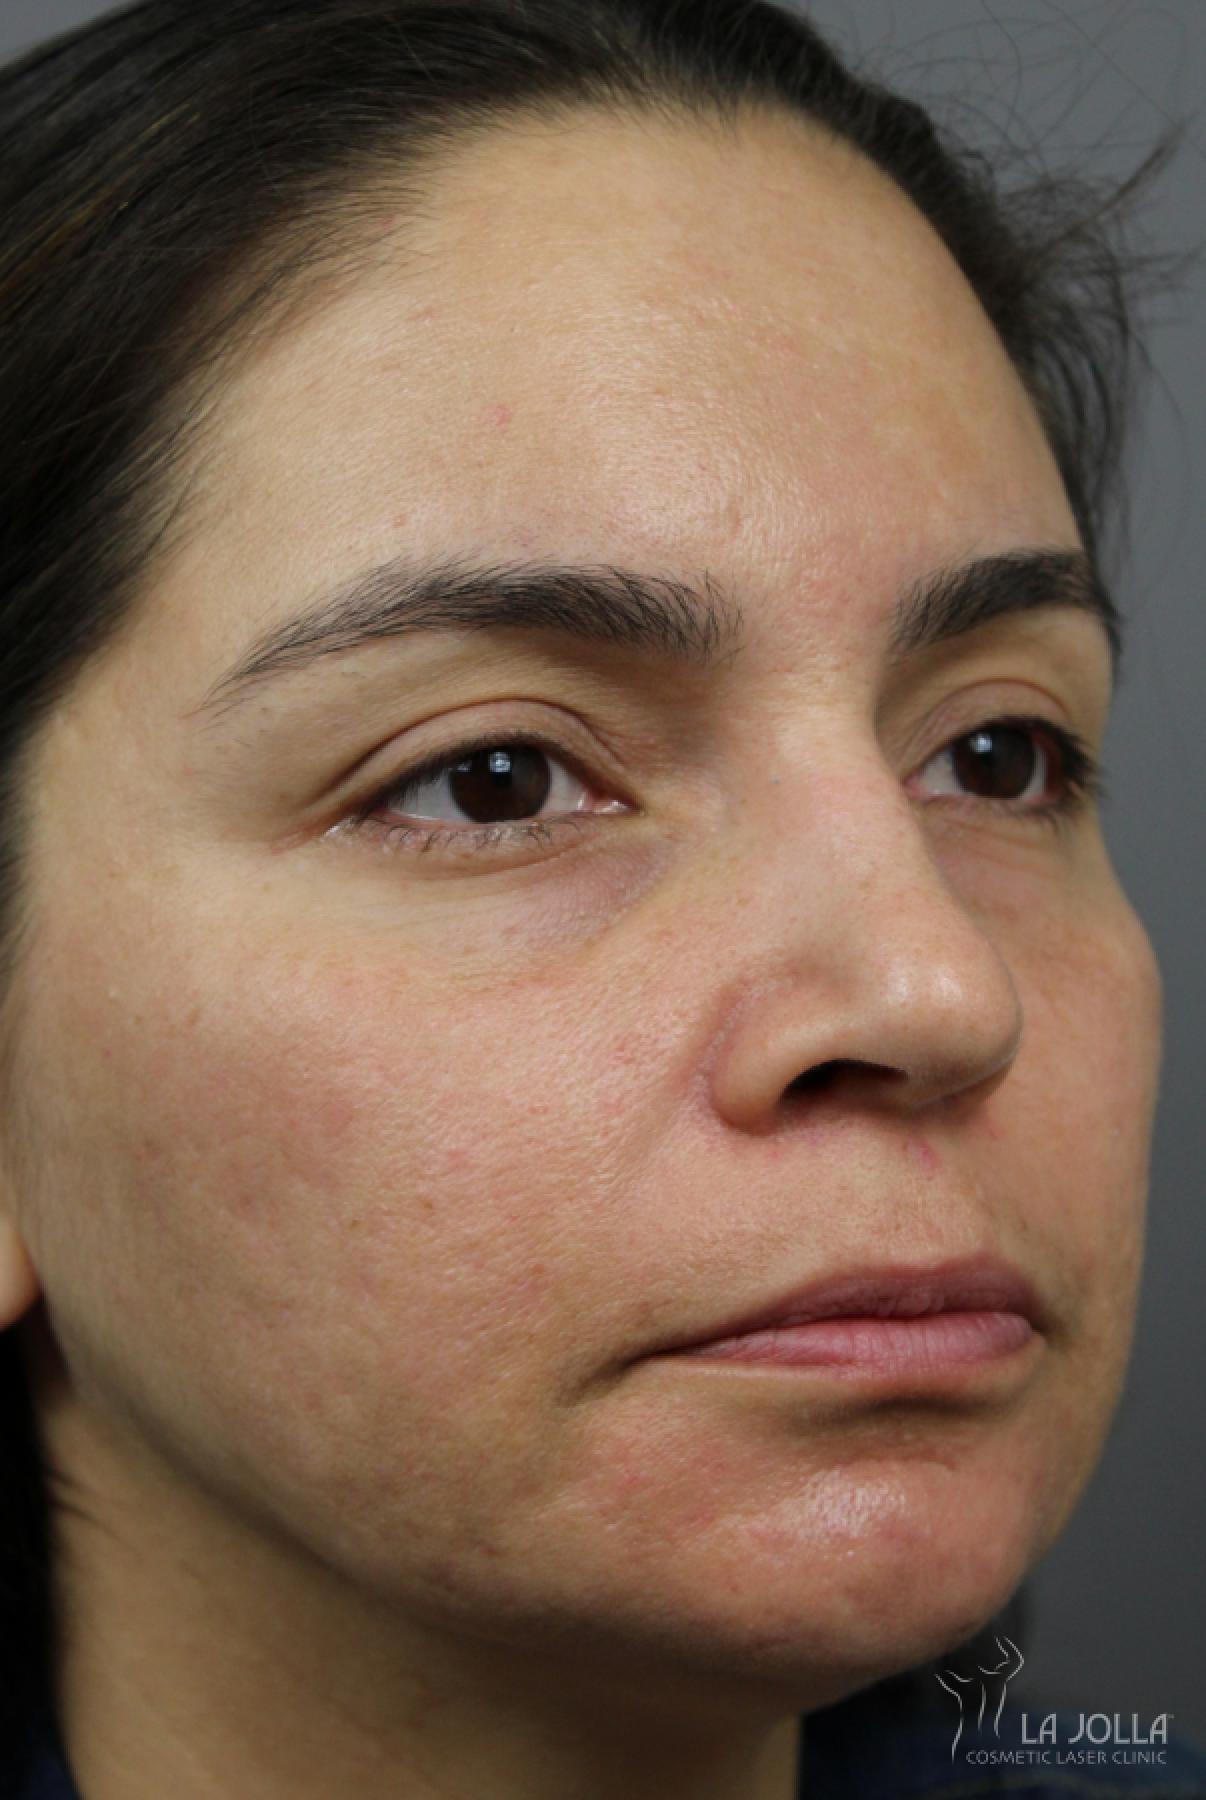 Acne Scars: Patient 3 - After 3